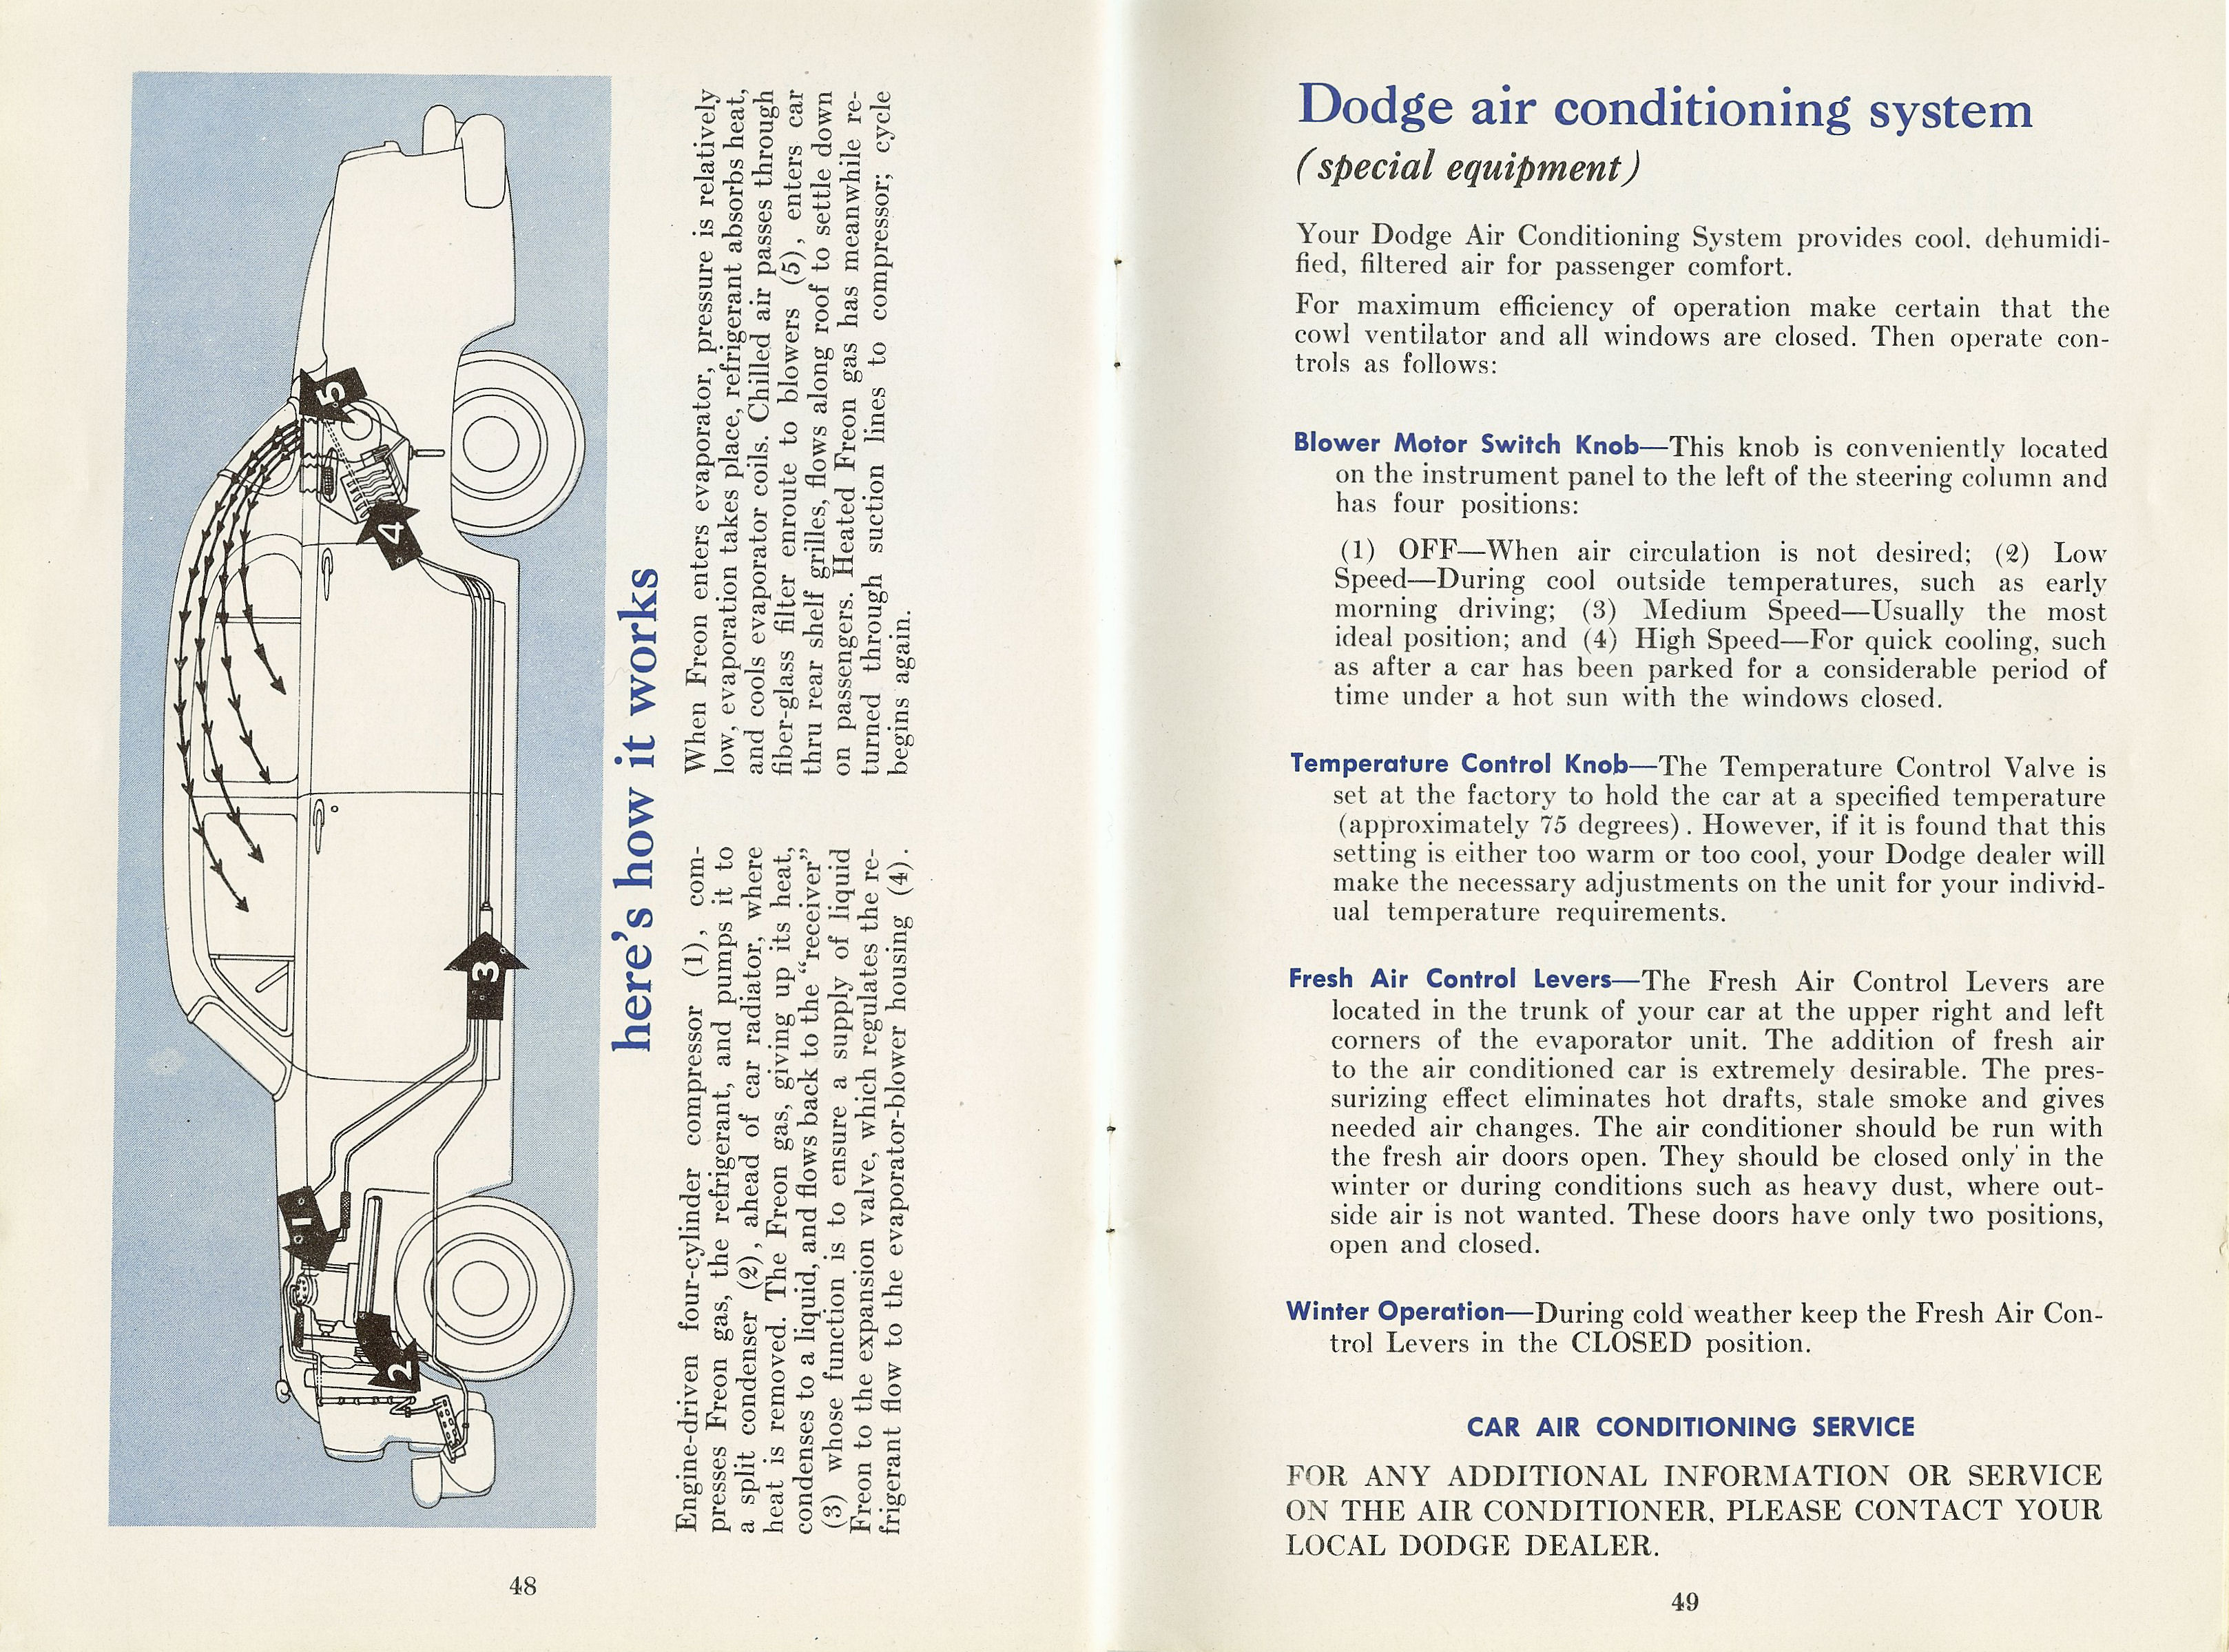 1954_Dodge_Owners_Manual-48-49